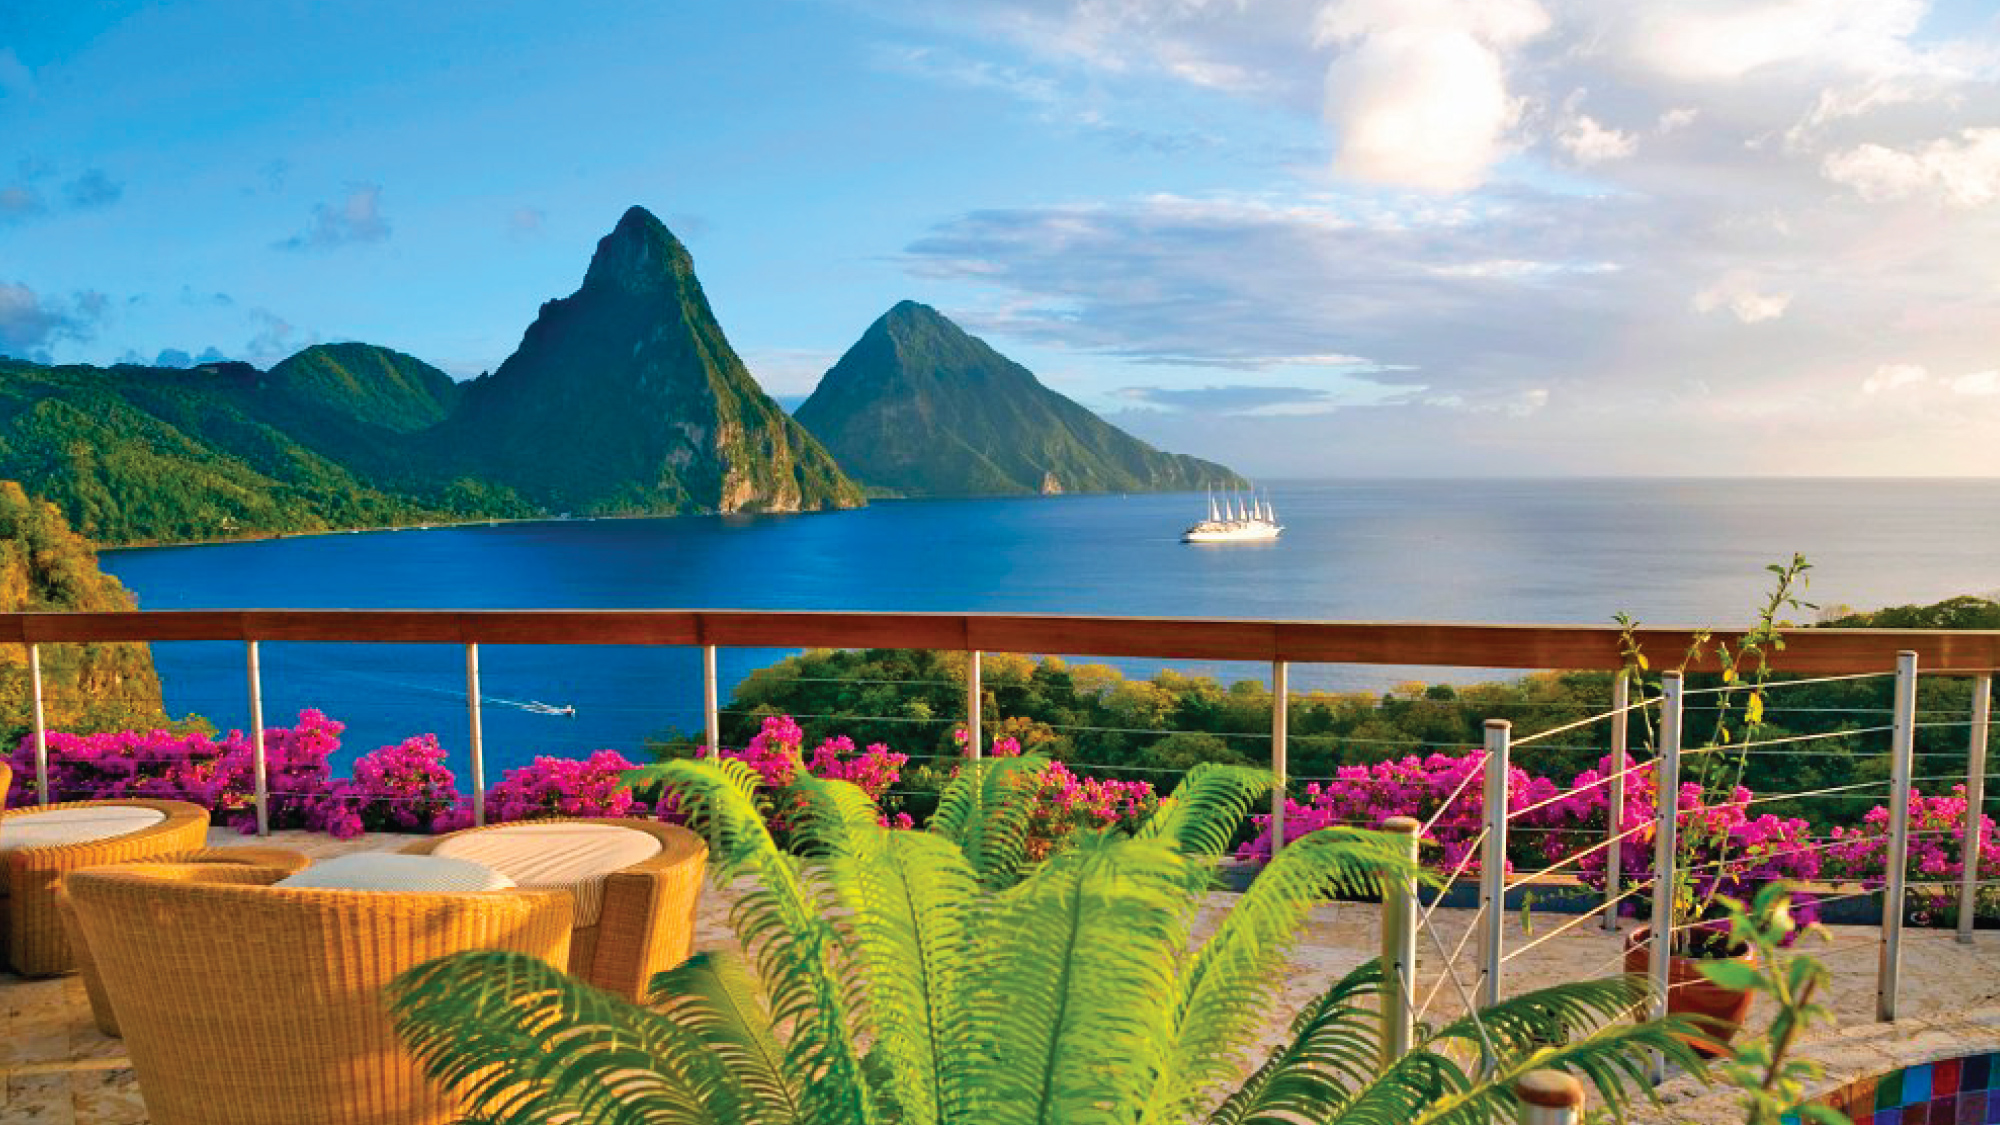 A stunning view from the terrace of Jade Mountain Hotel in Castries, St. Lucia, overlooking the azure waters of the Caribbean Sea. Tailored for self-flying pilots